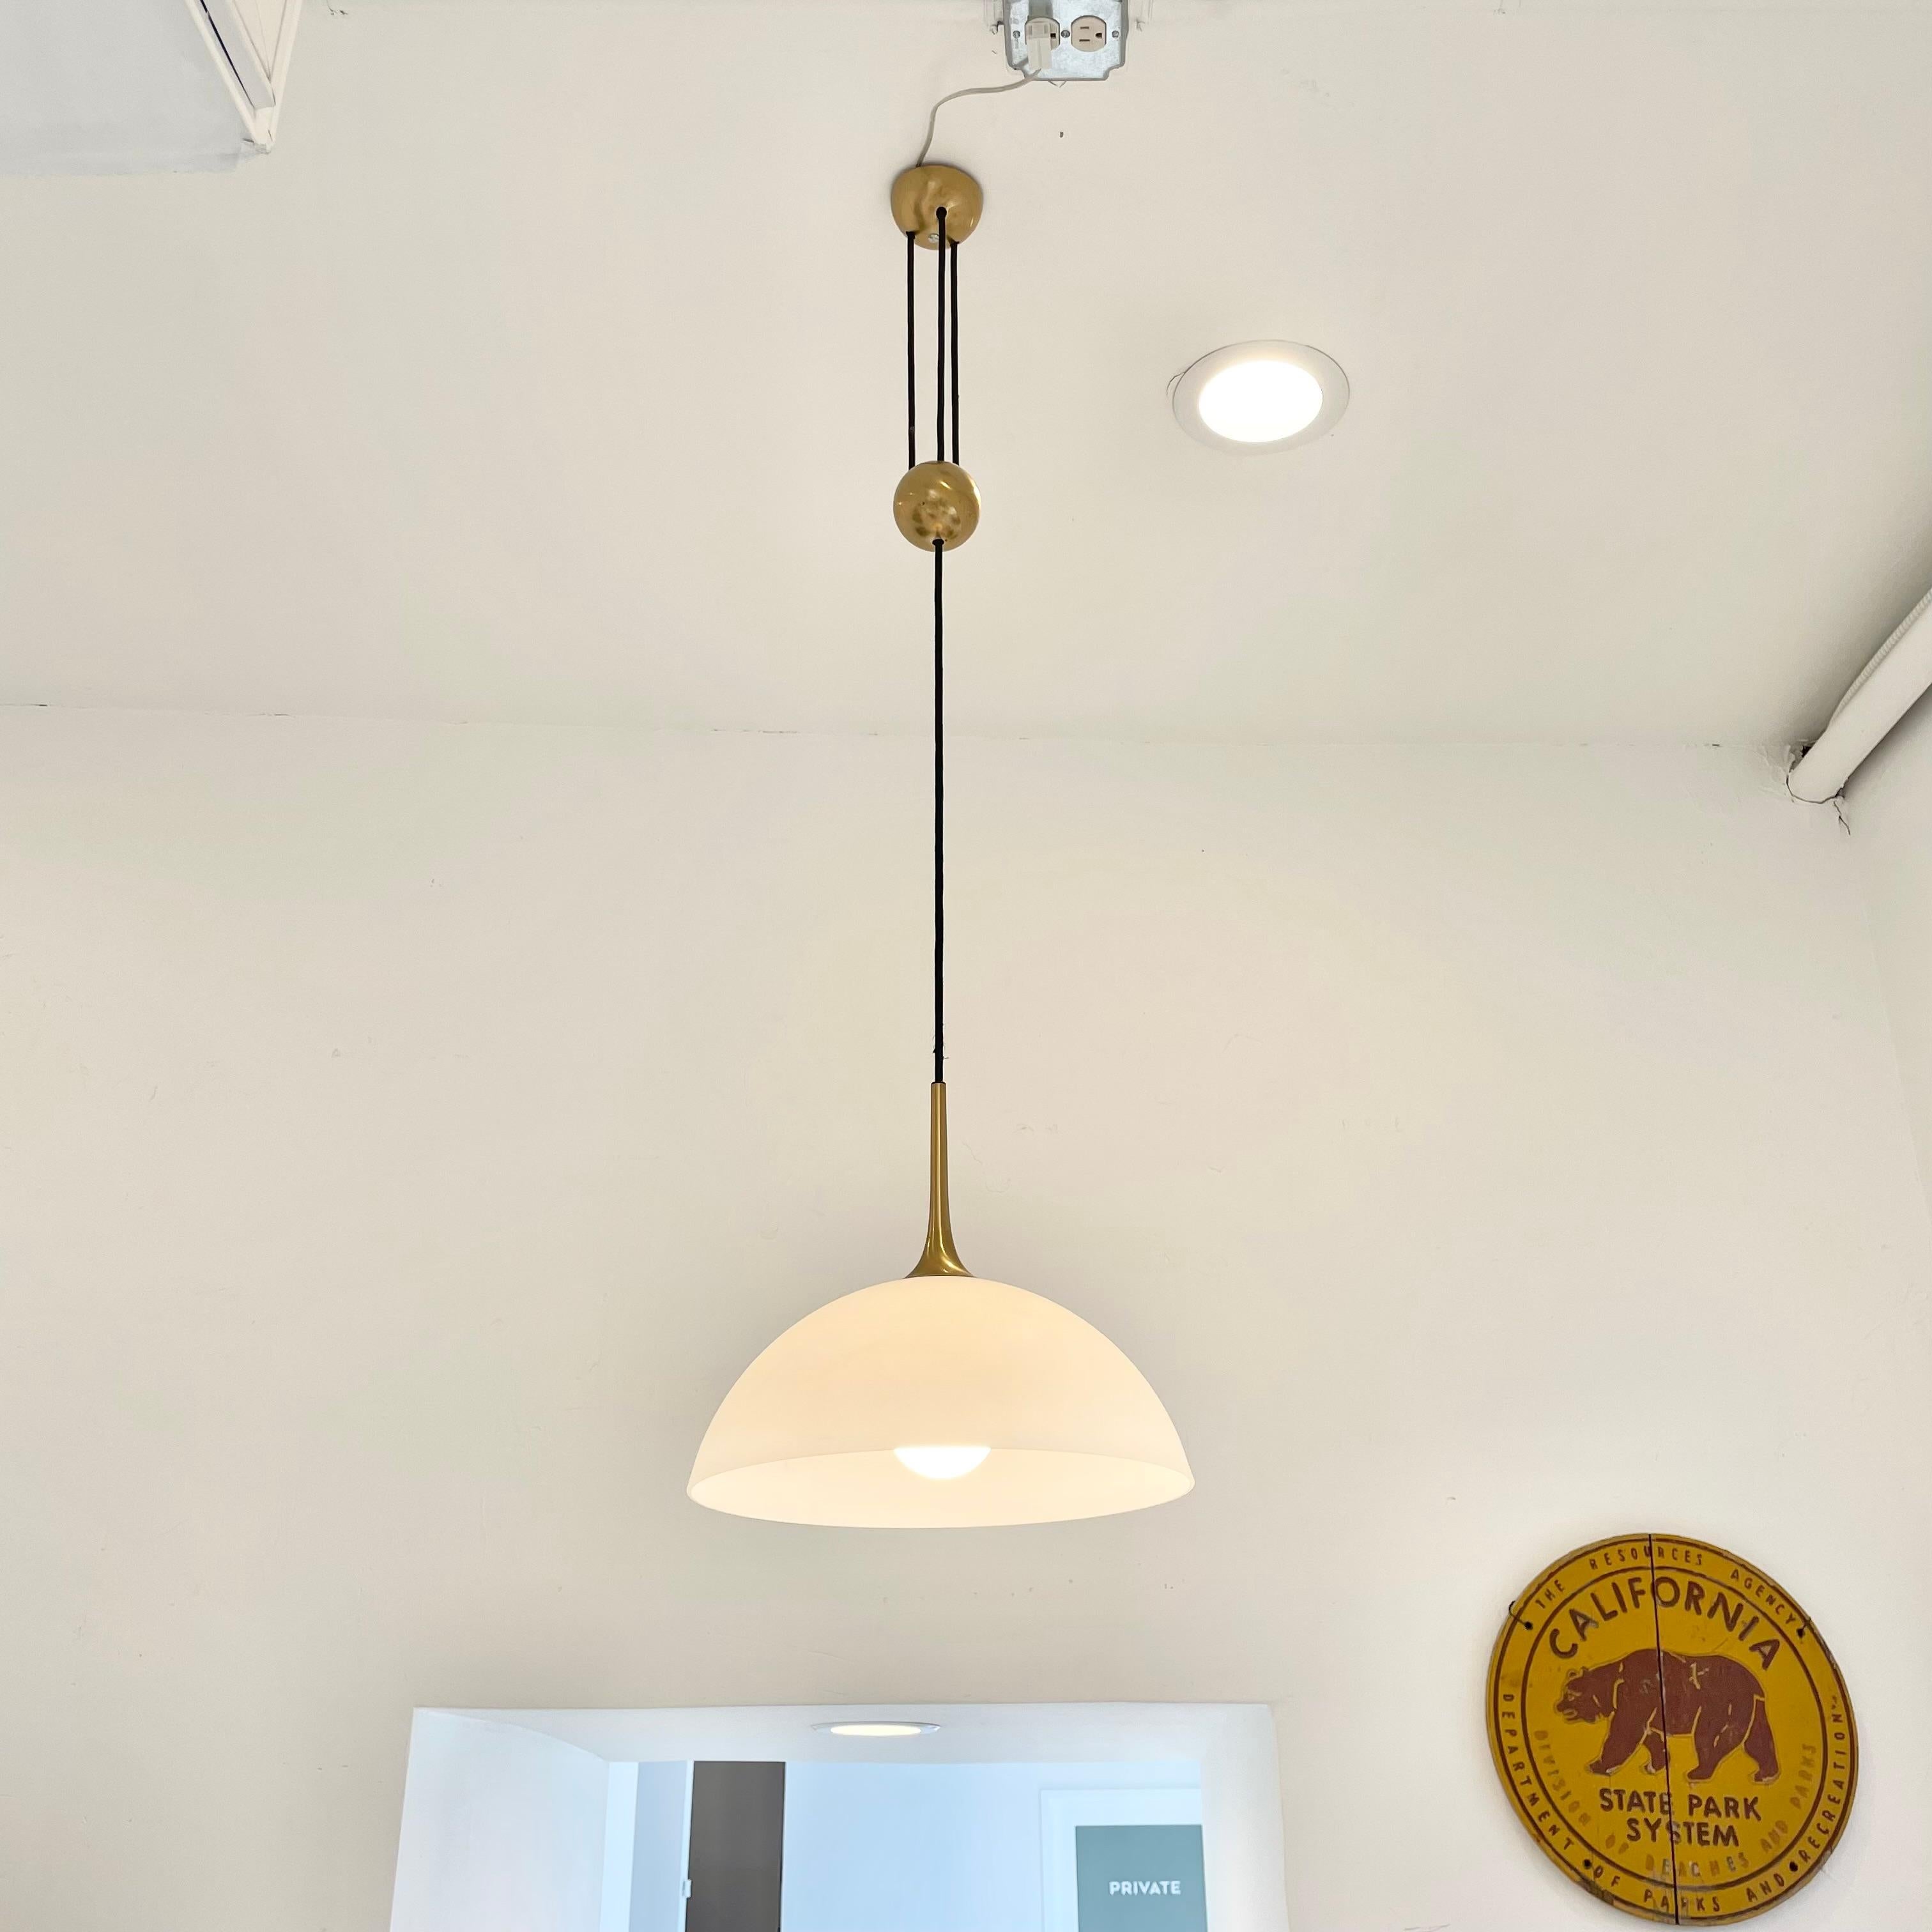 Rare counter balance pendant by Florian Schulz. Beautiful brass canopy feeds three black cloth cords with a centered brass counter balance ball. Frosted glass shade can be pulled down or pushed up to shorten or extend the length of the pendant